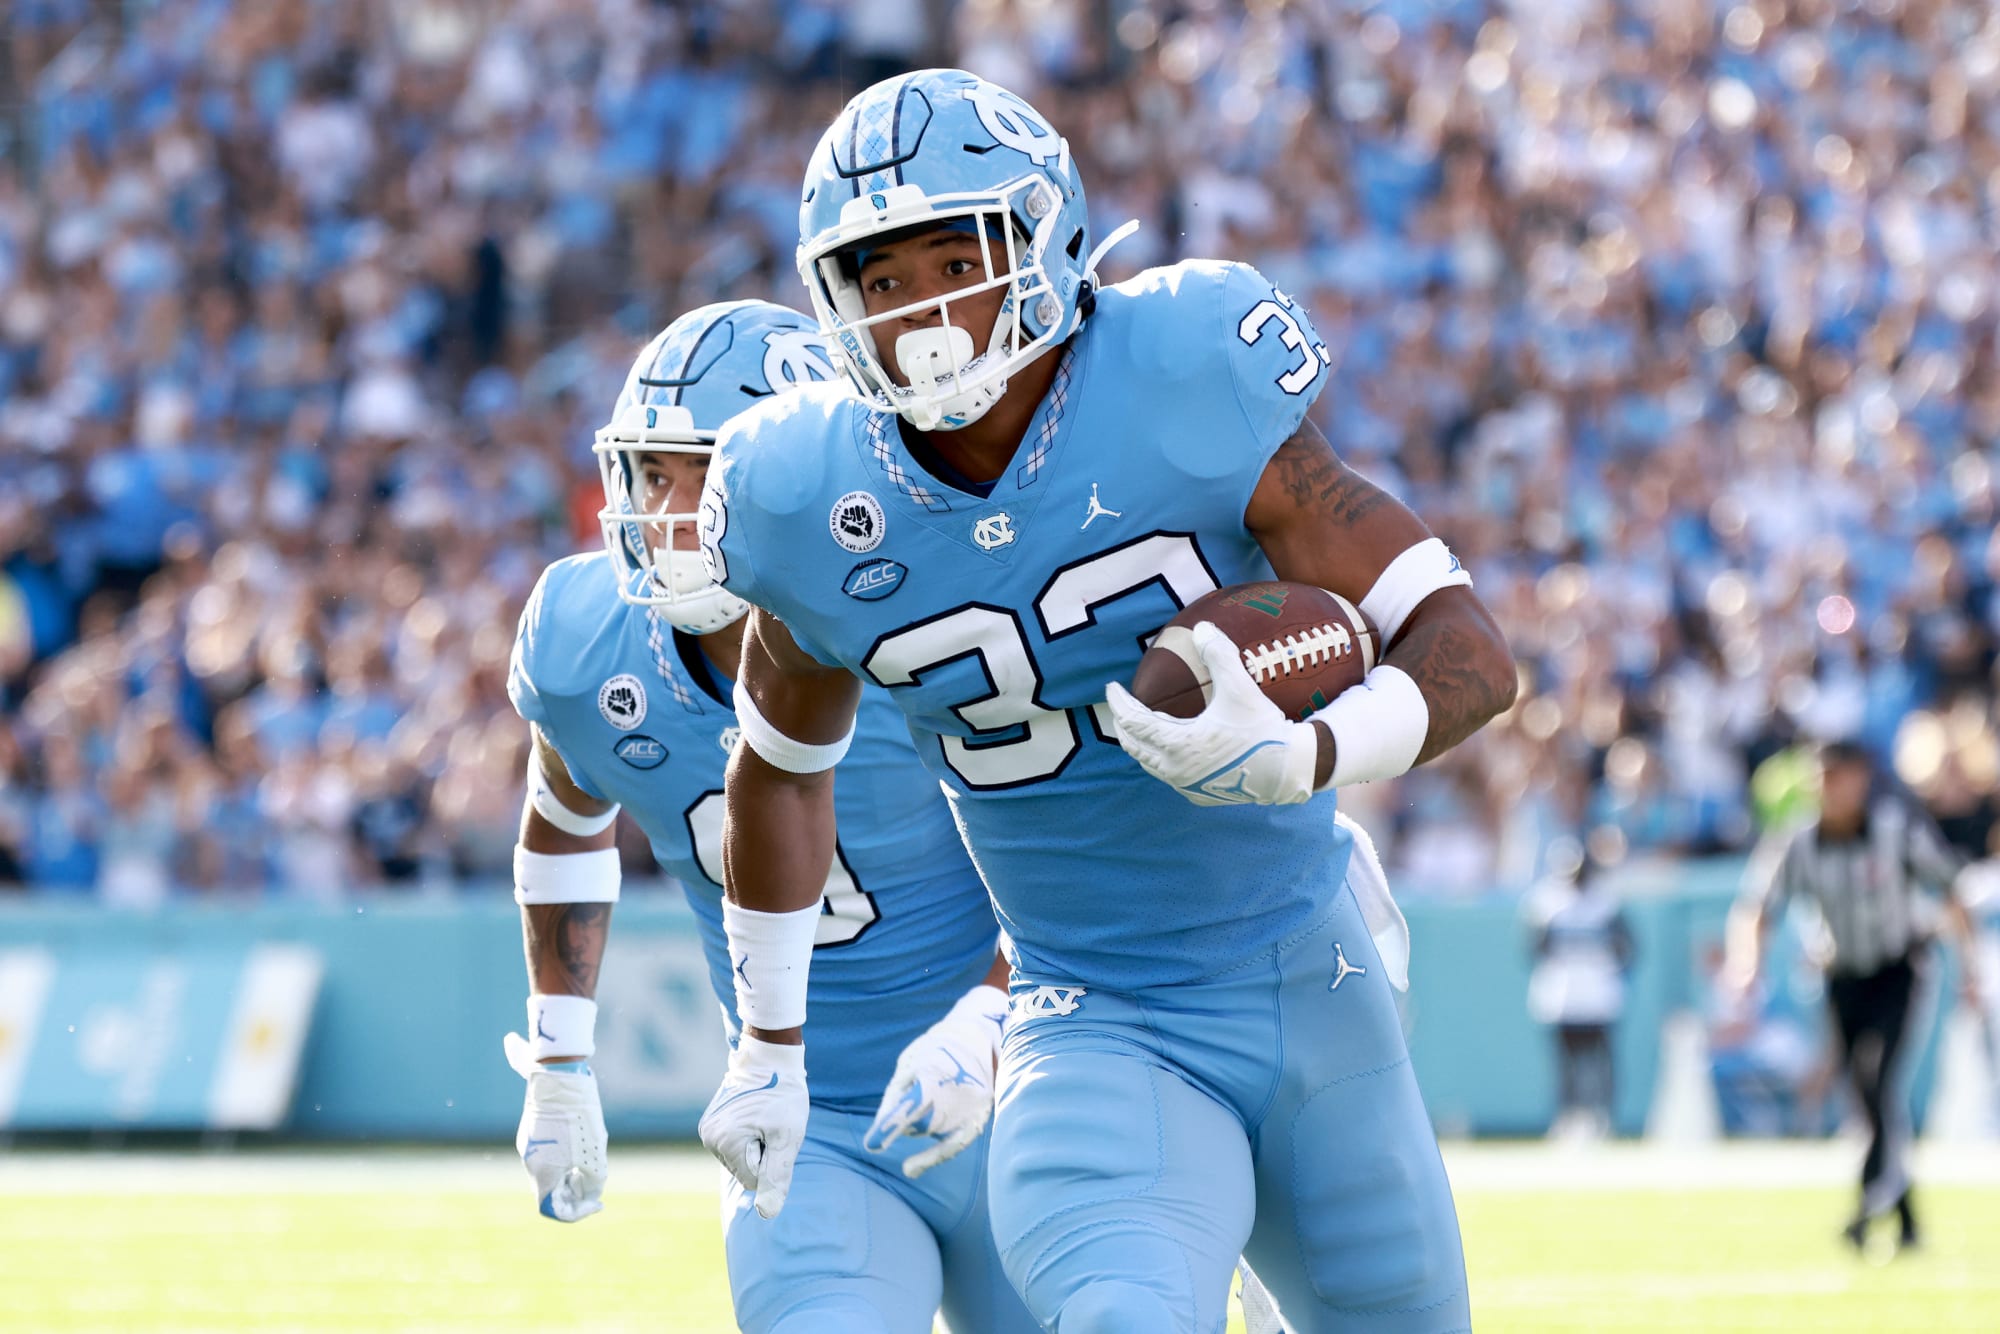 UNC Football: 2022 Positional Preview: Linebackers